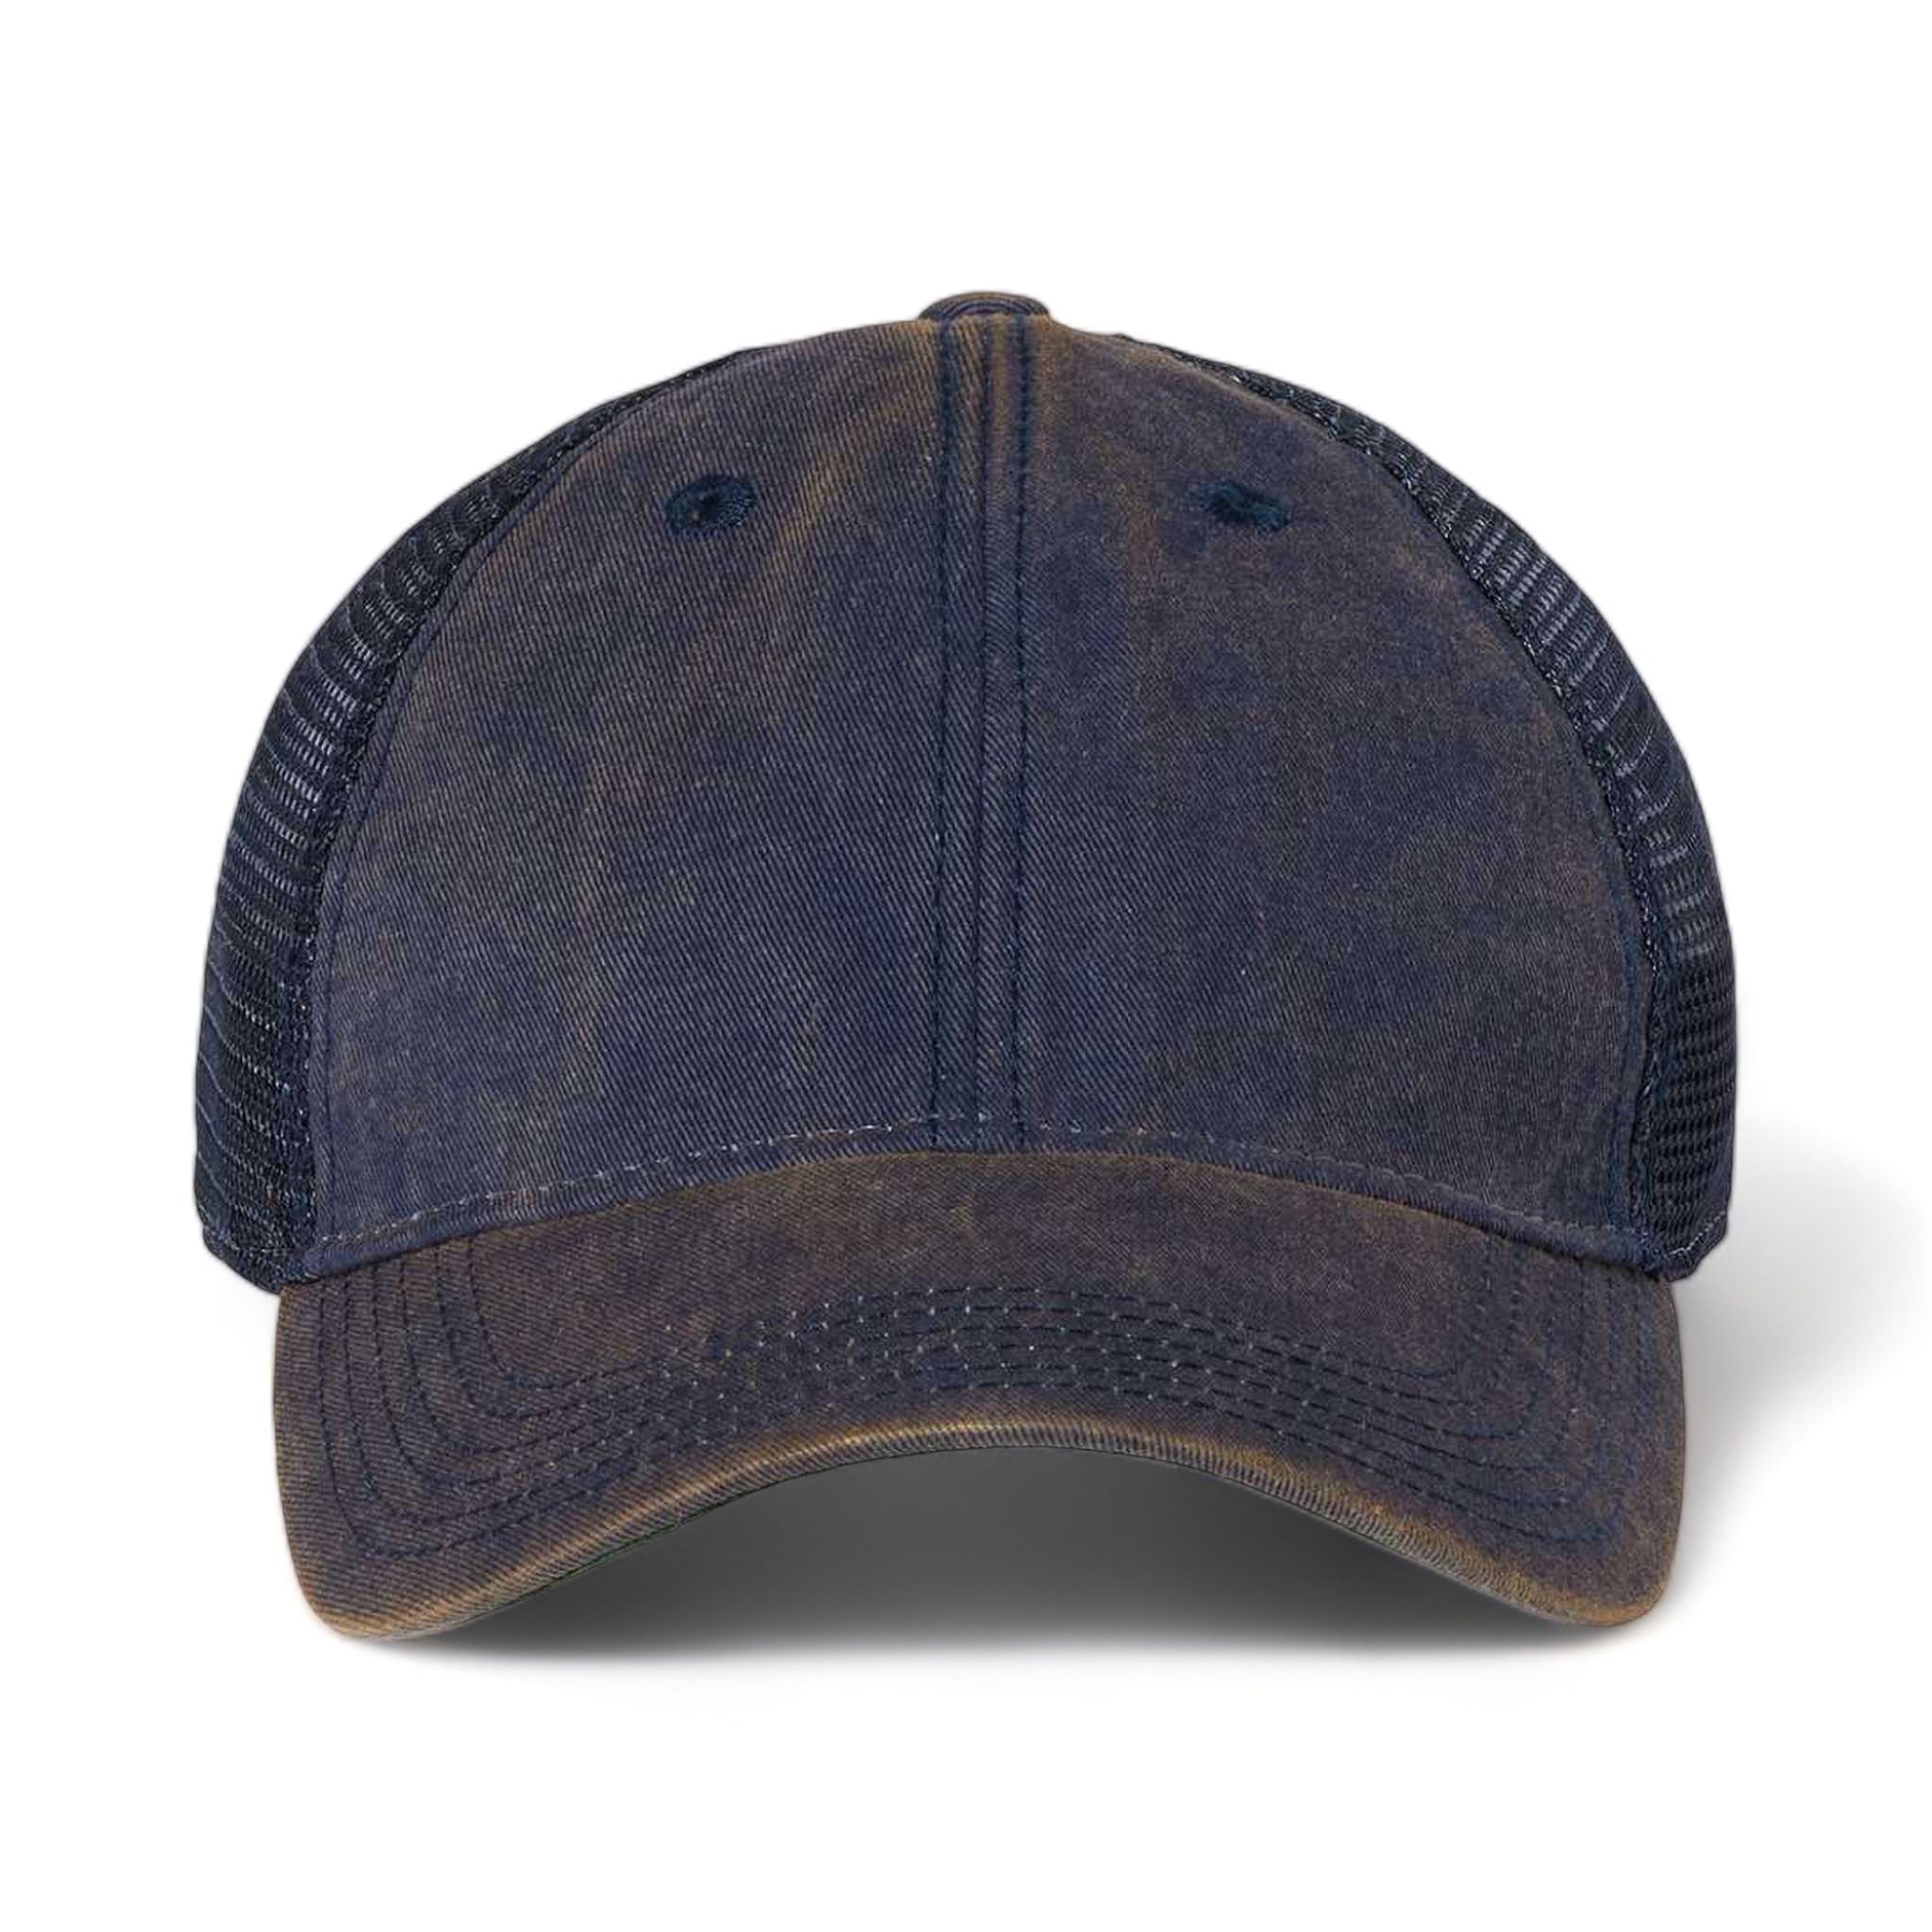 Front view of LEGACY OFA custom hat in navy and navy